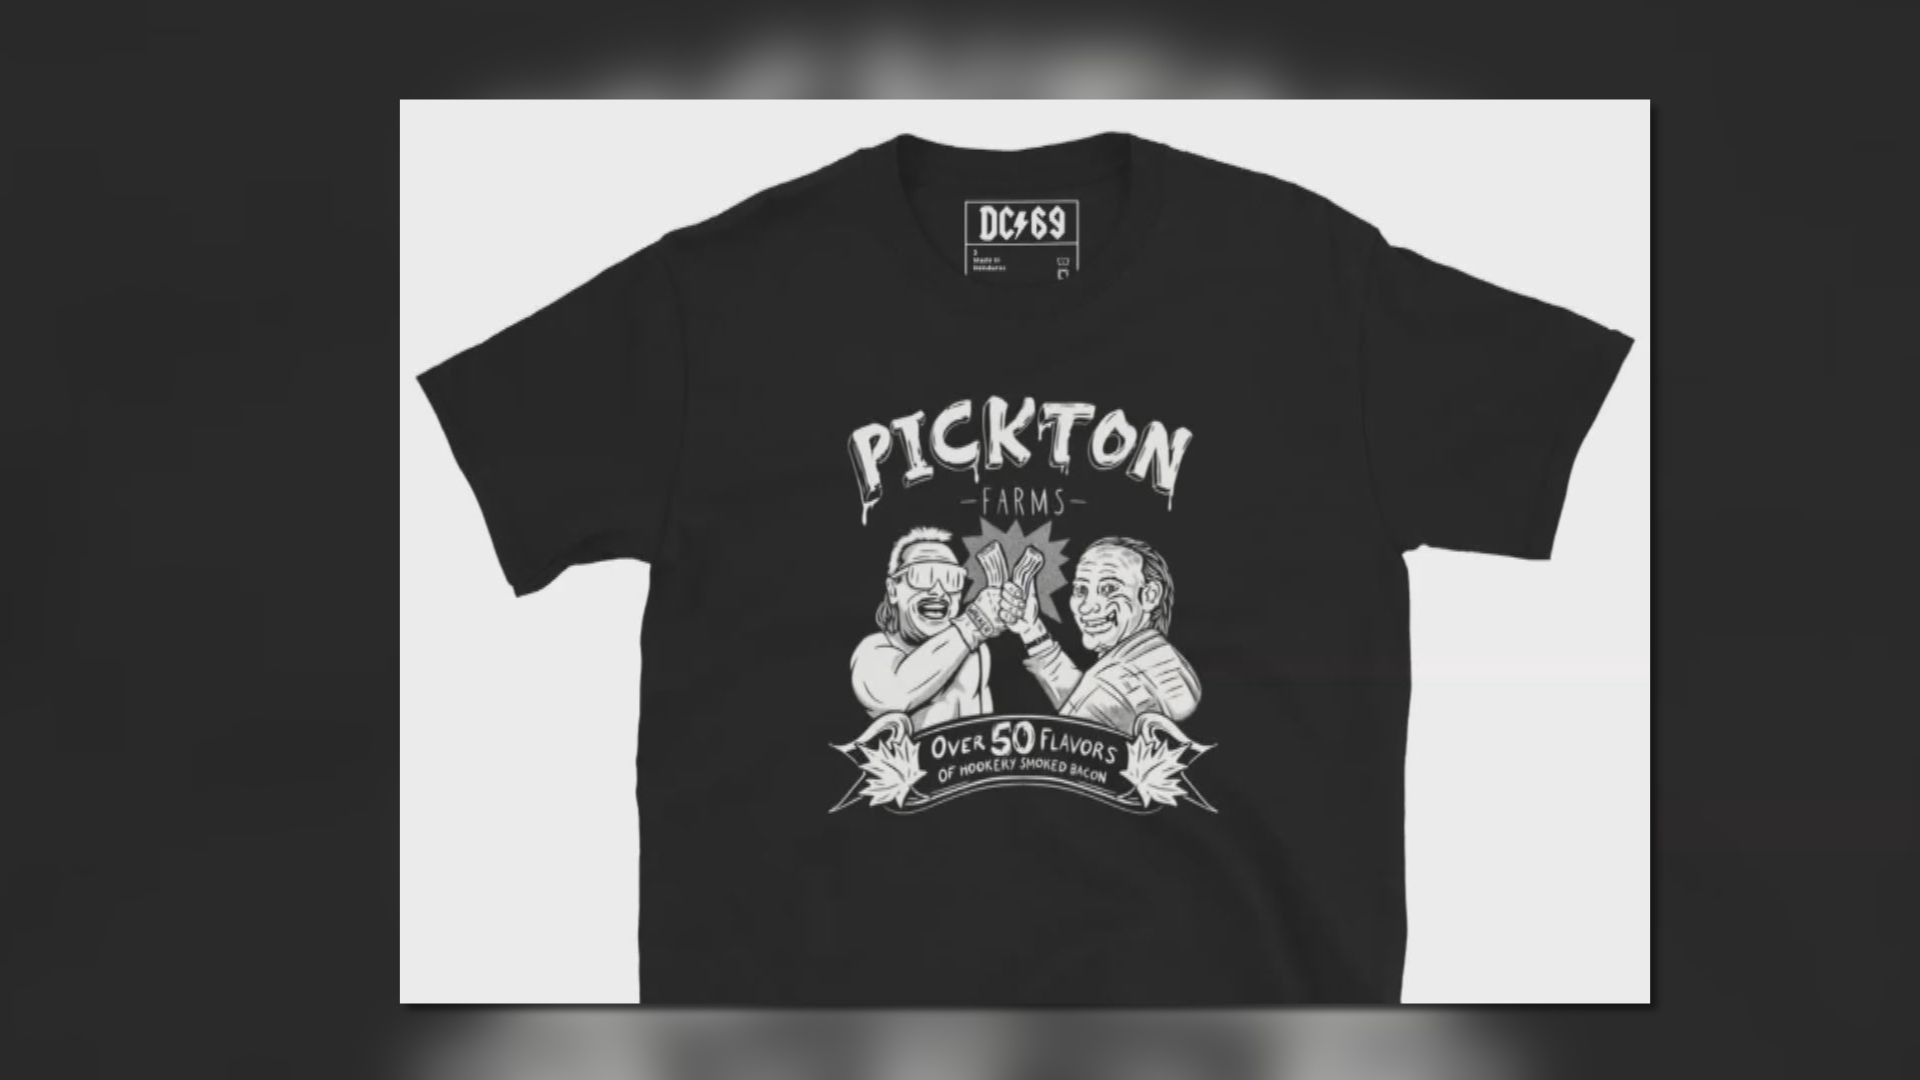 ‘Disturbing’ T-shirt with Robert Pickton holding ‘hookery smoked bacon’ causes outrage